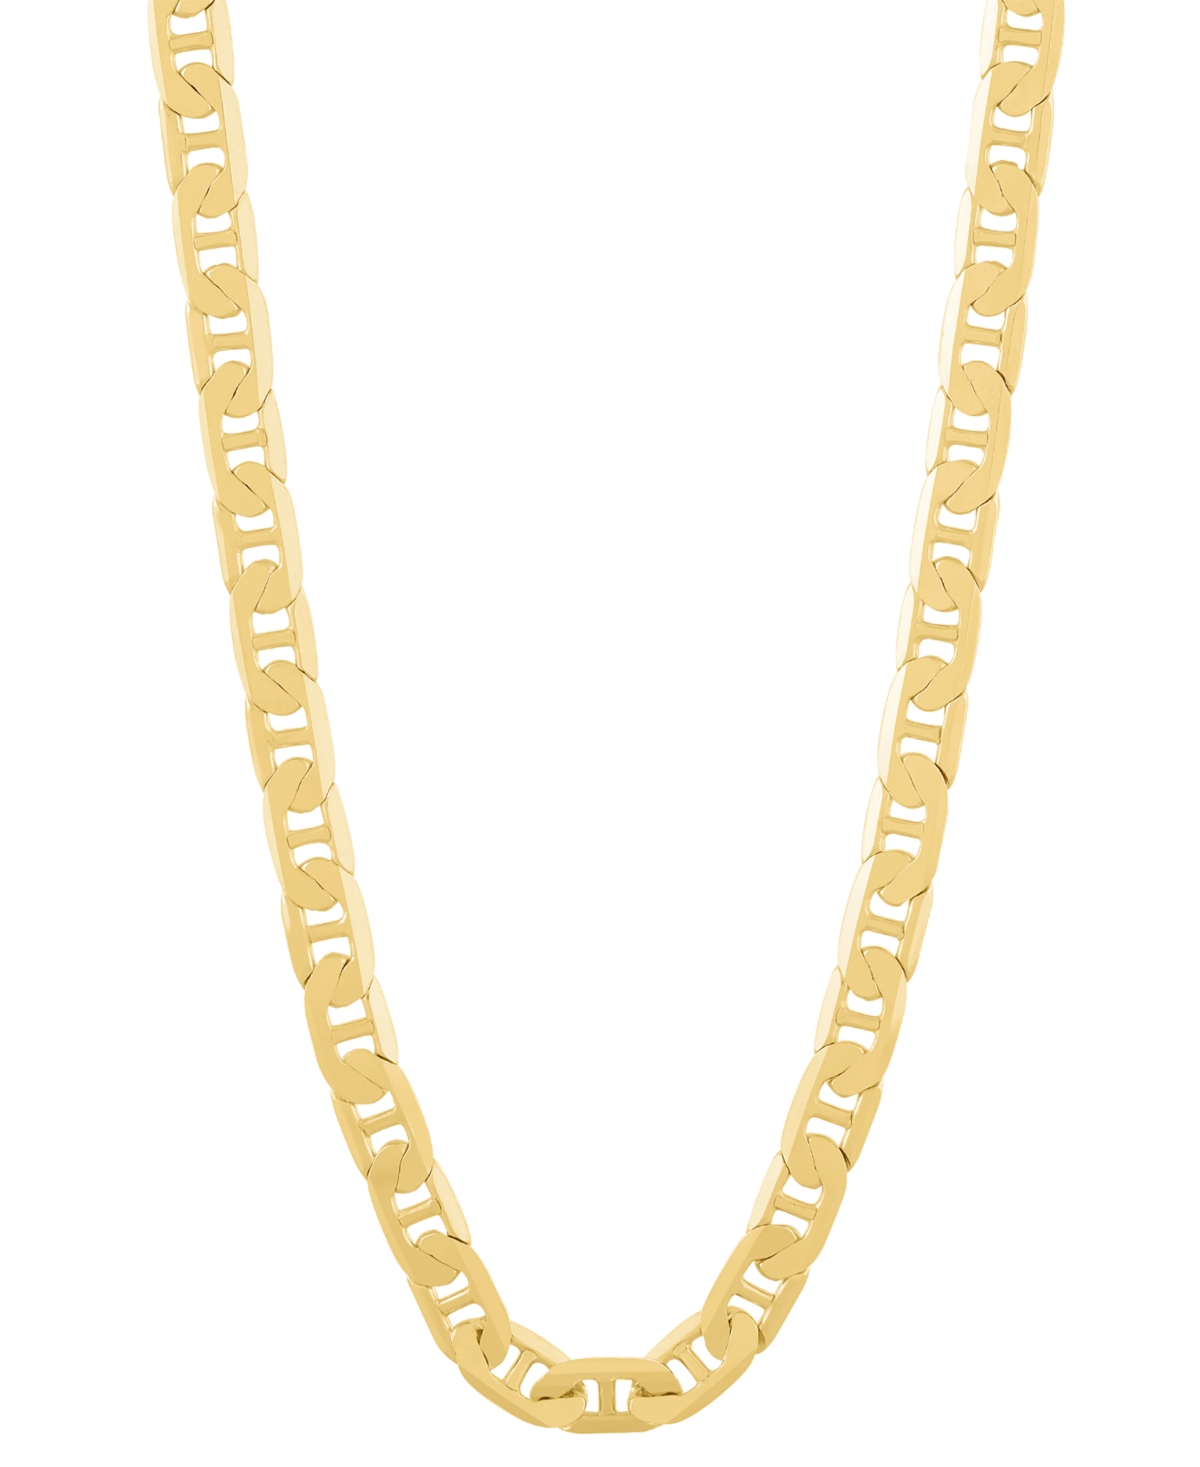 Italian Silver Polished Mariner Link 22" Chain Necklace In 18k Gold-plated Sterling Silver &â Sterling Silver In Gold Over Silver